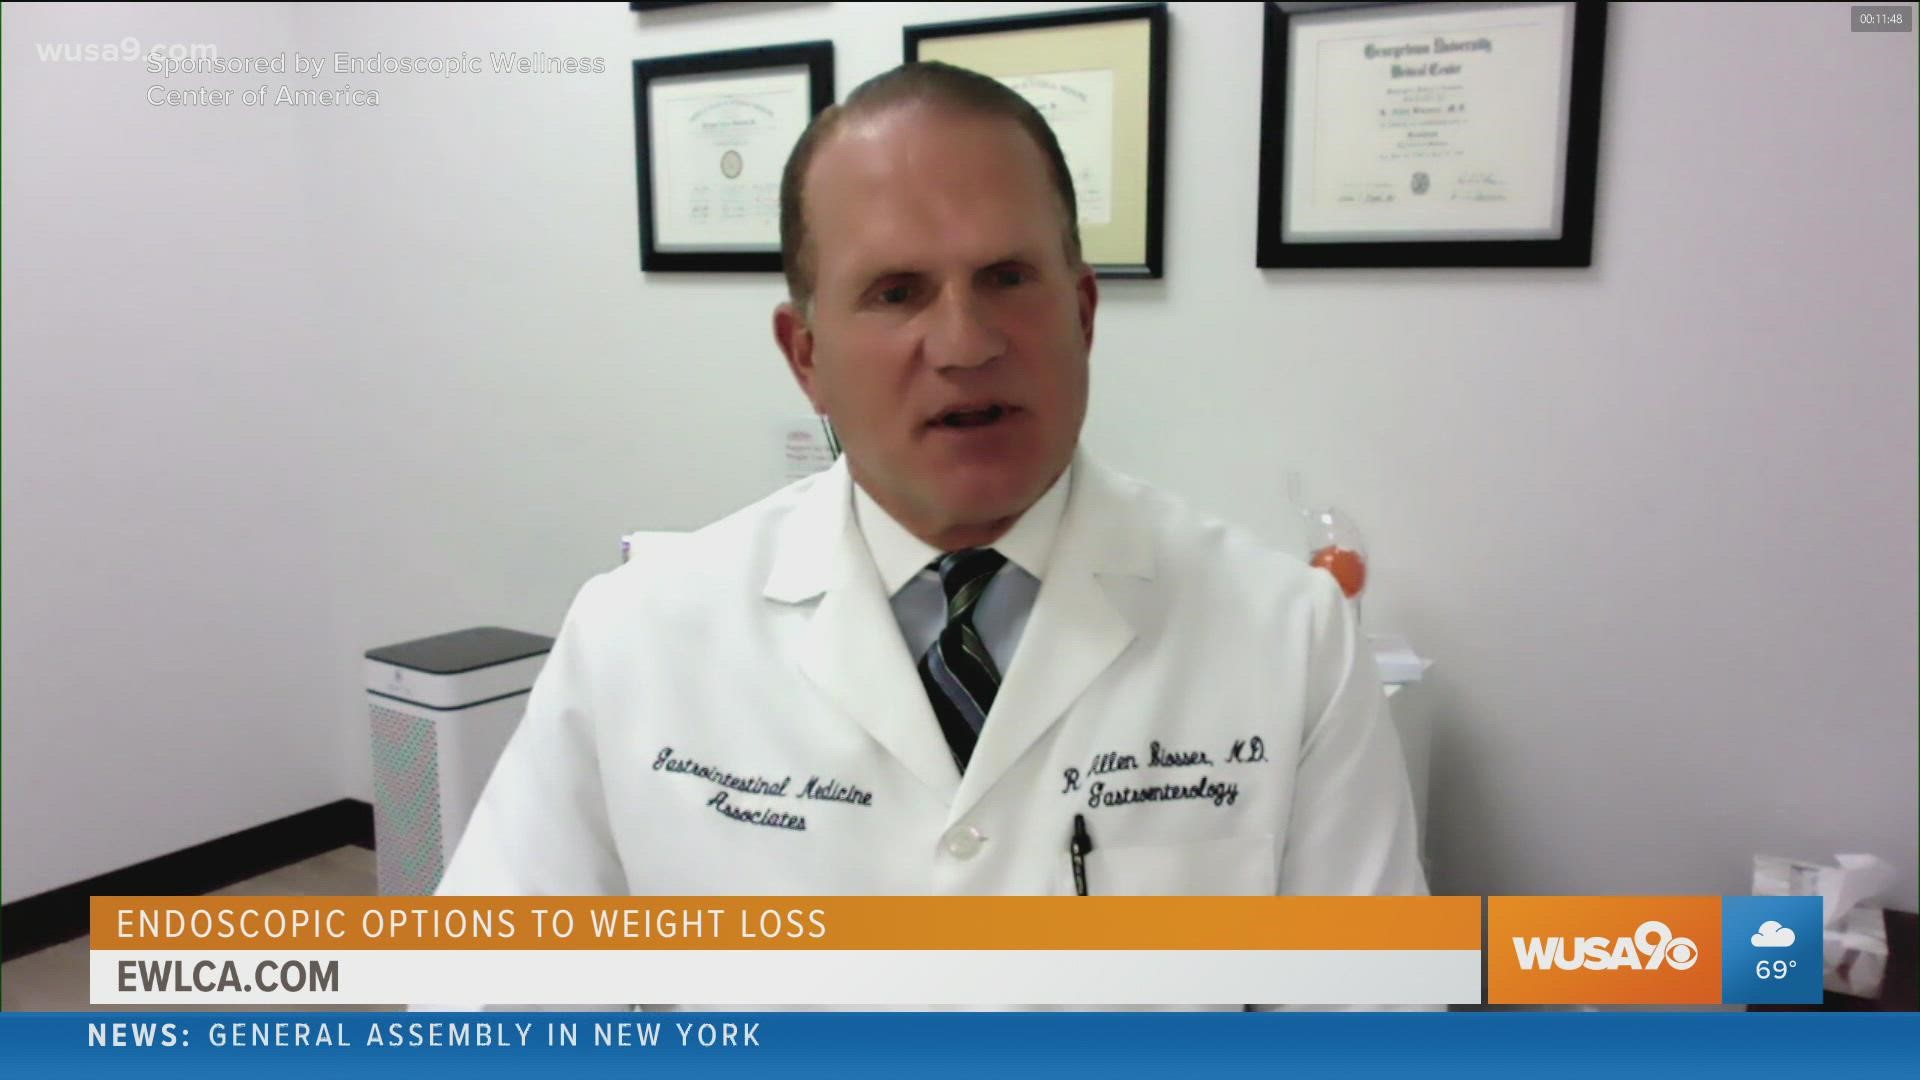 Dr. Allen Blosser explains how endoscopic weight loss options can lead to fast recovery. Sponsored by Endoscopic Weight Loss Center of America.